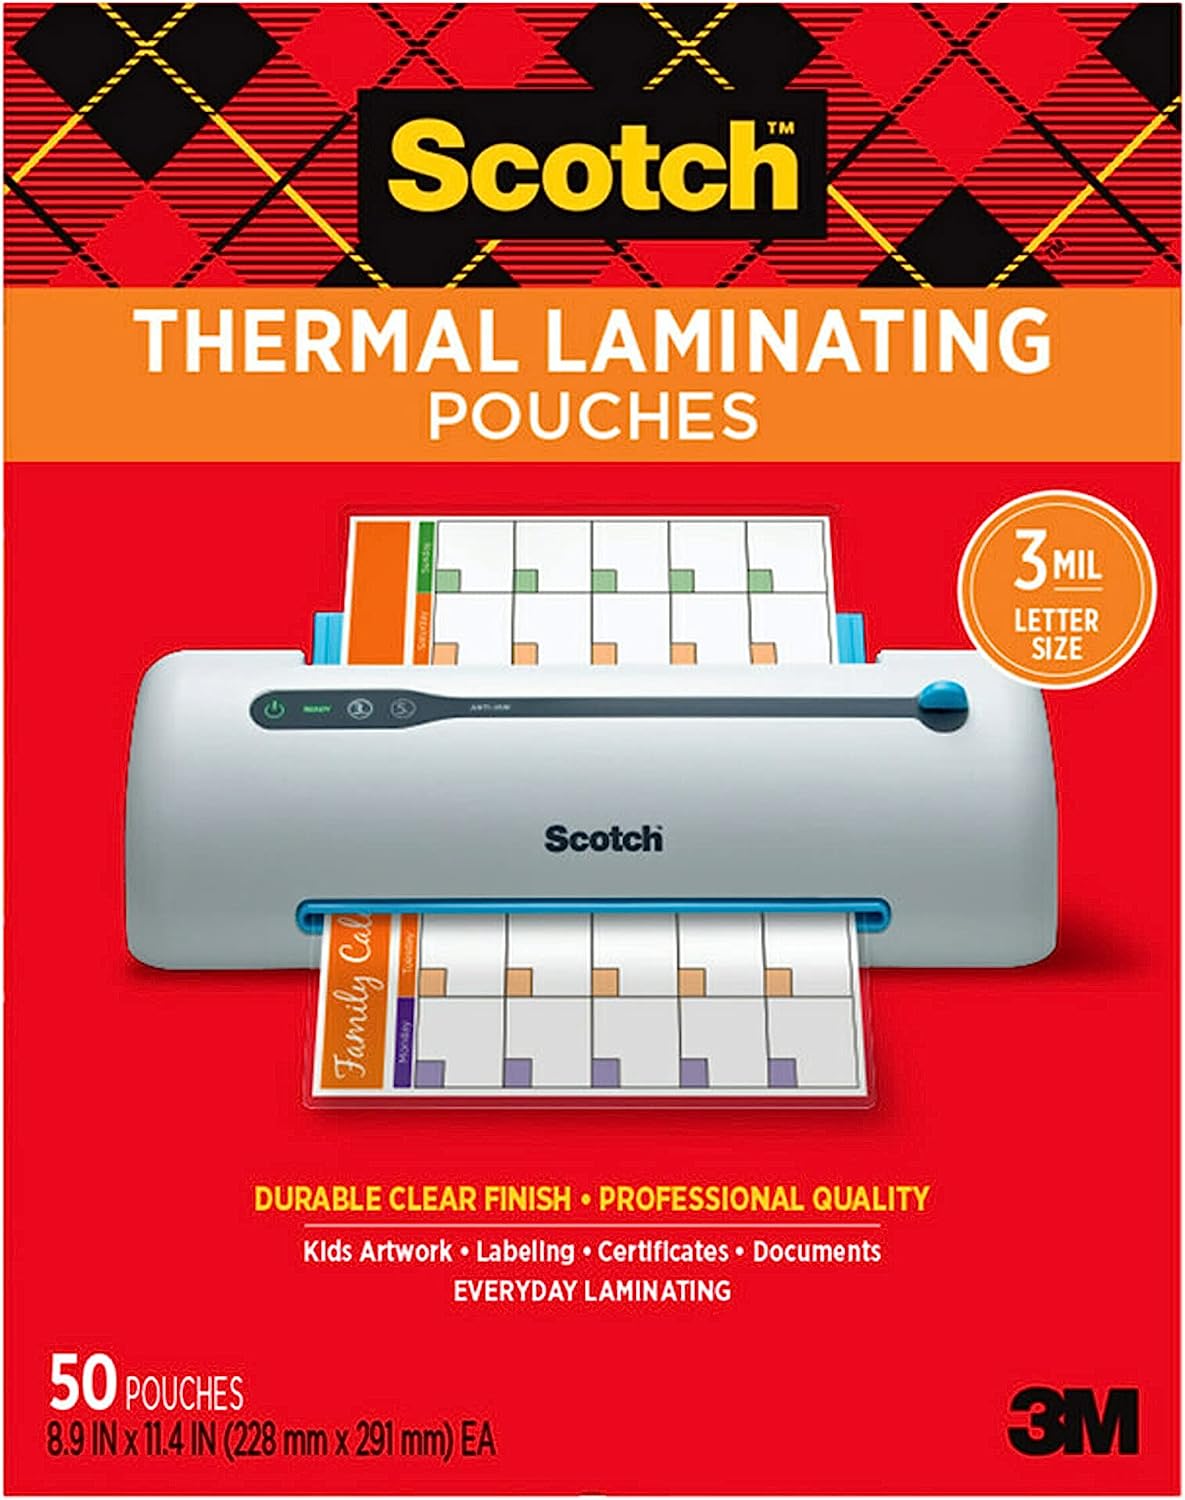 Scotch Thermal Laminating Pouches, 50 Pack Laminating Sheets, 3 Mil, 8.9 x 11.4 Inches